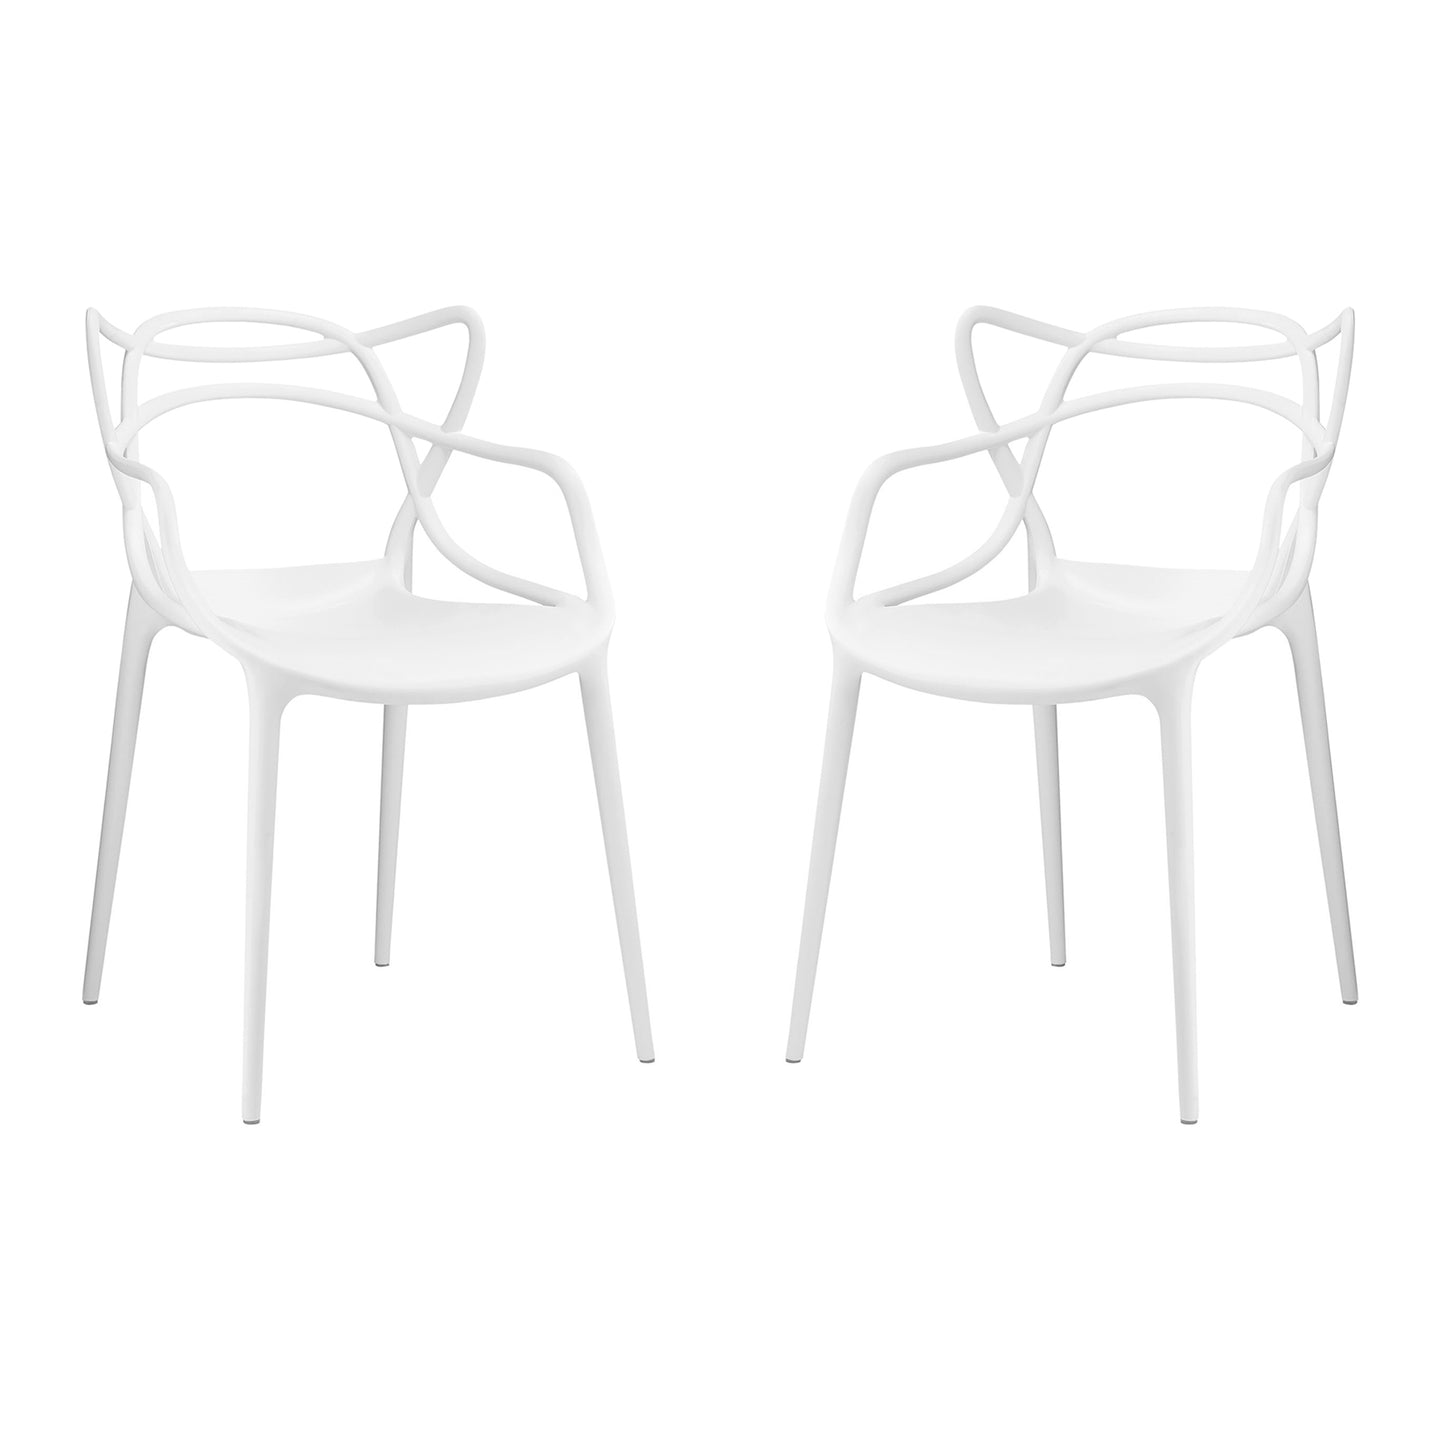 Monte Dining Chair - White